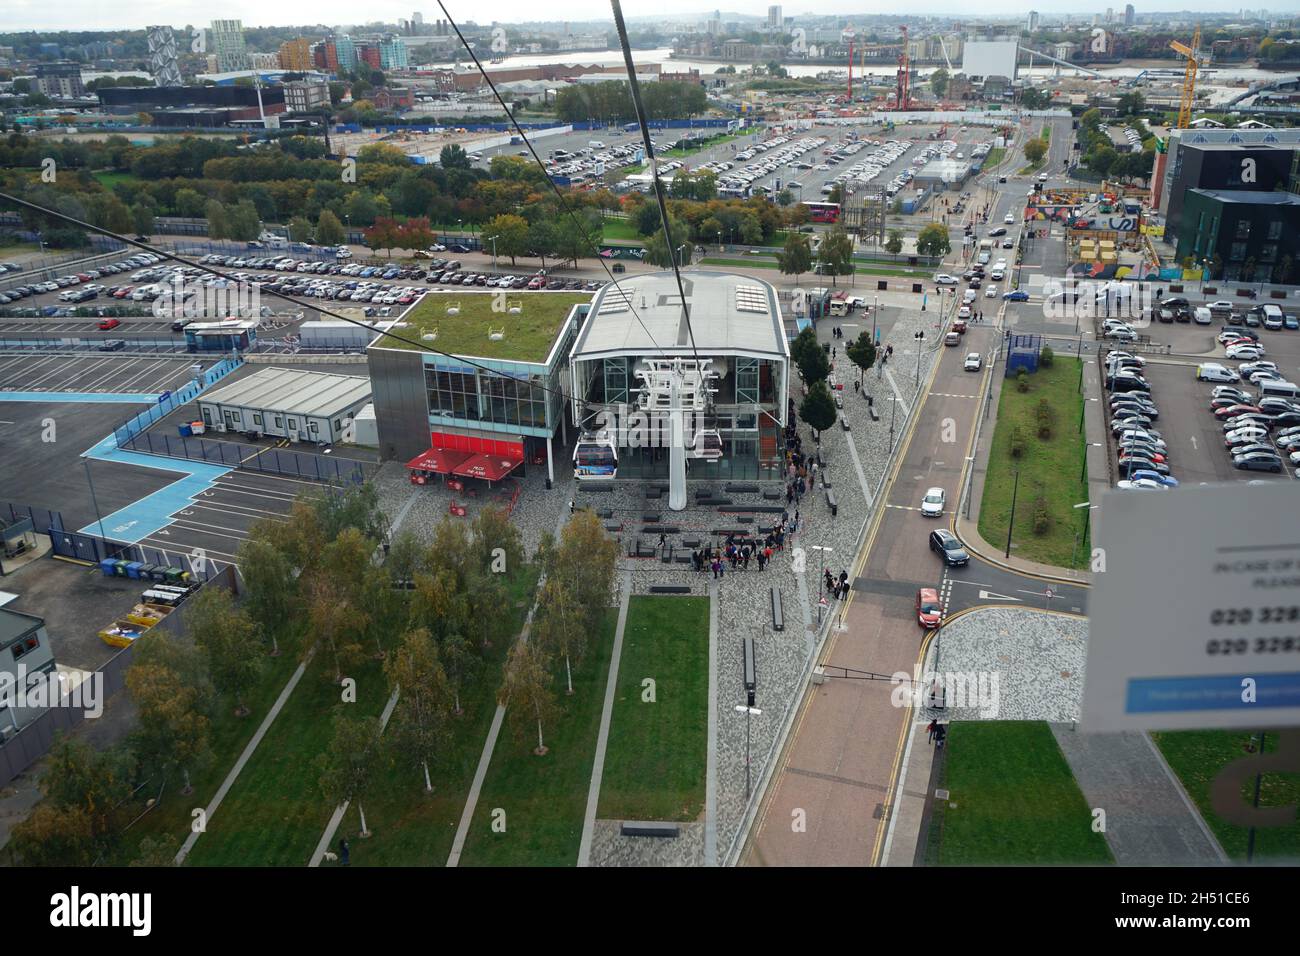 An aerial view of the Greenwich Peninsula from the emirates cable car zip lining over London River Thames in he U.K Stock Photo